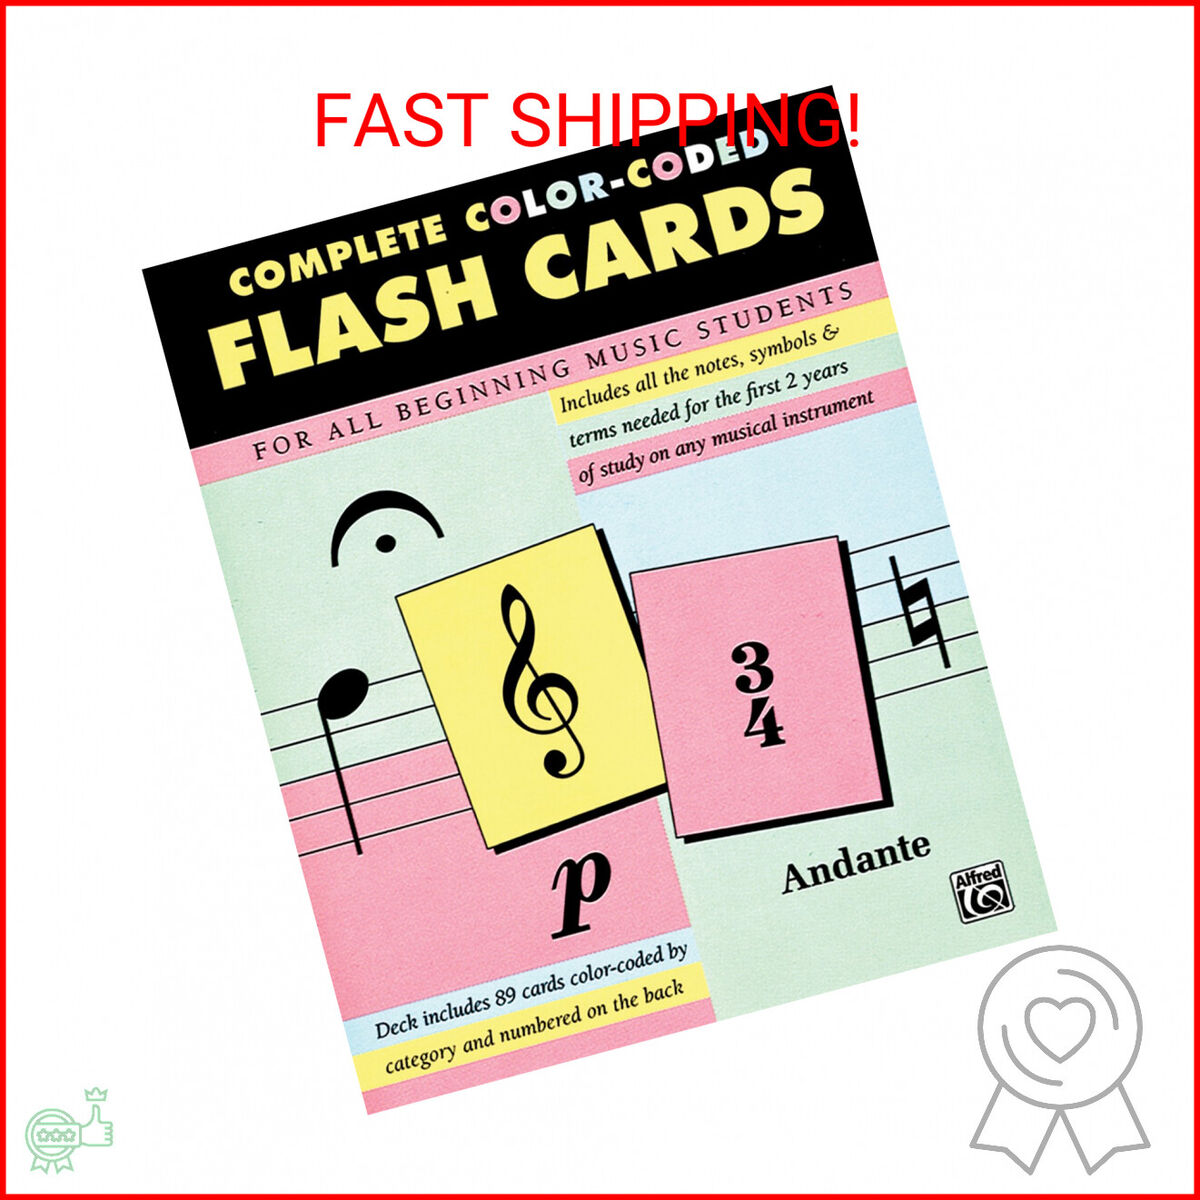 Plete color coded flash cards for all beginning music students